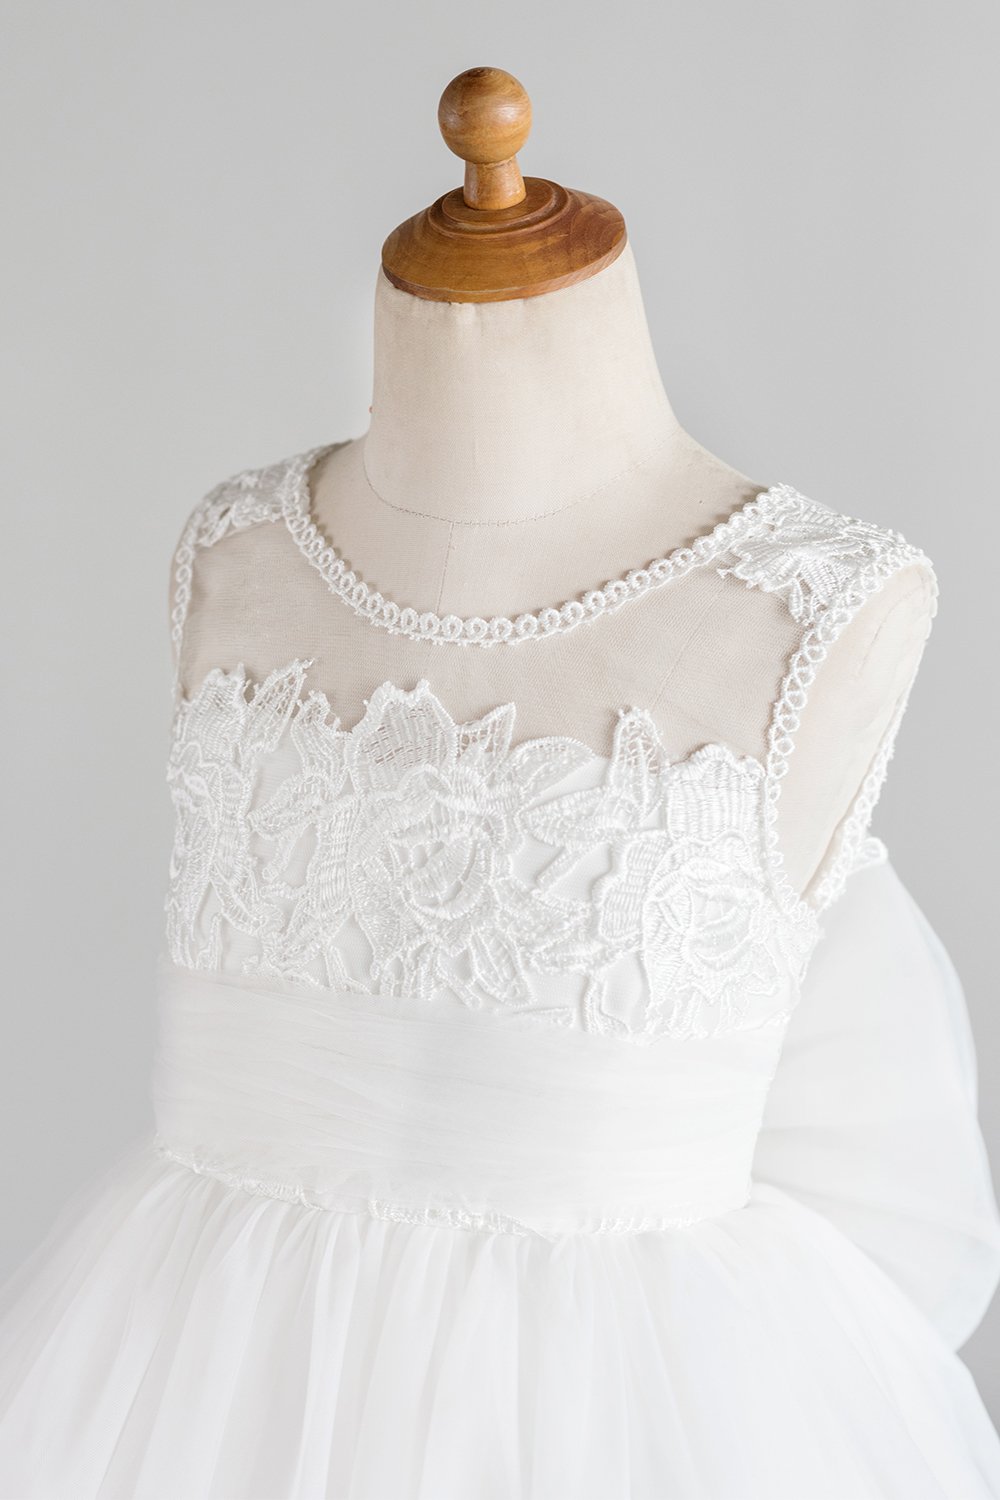 White Flower Girl Dress with Bow